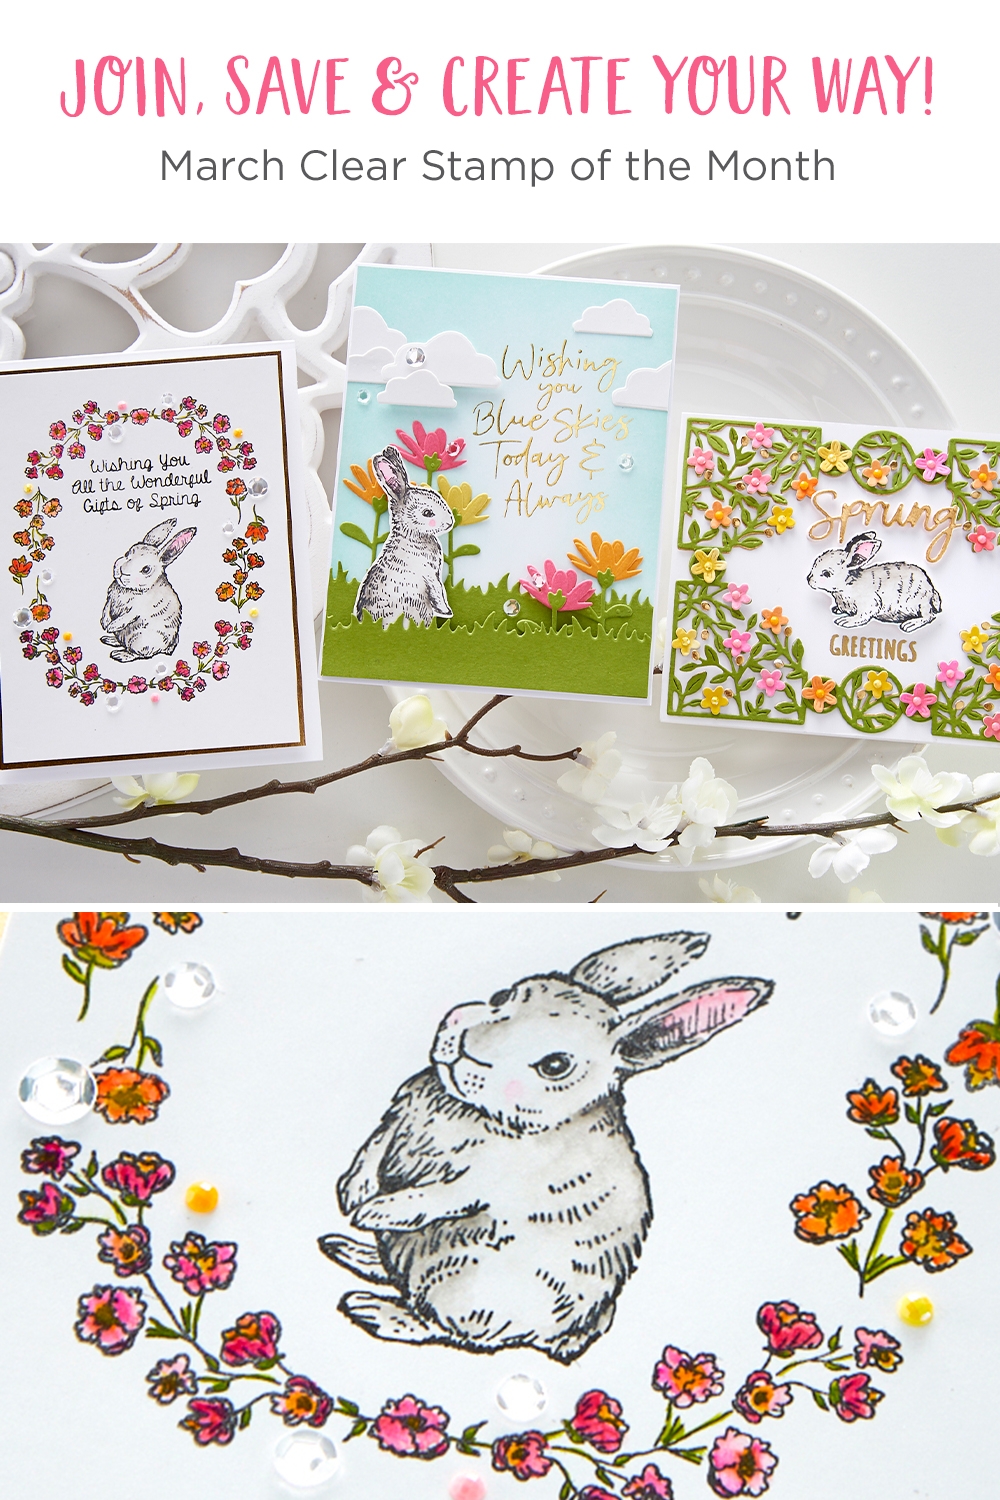 March 2021 Clear Stamp of the Month is Here – Wonderful Spring